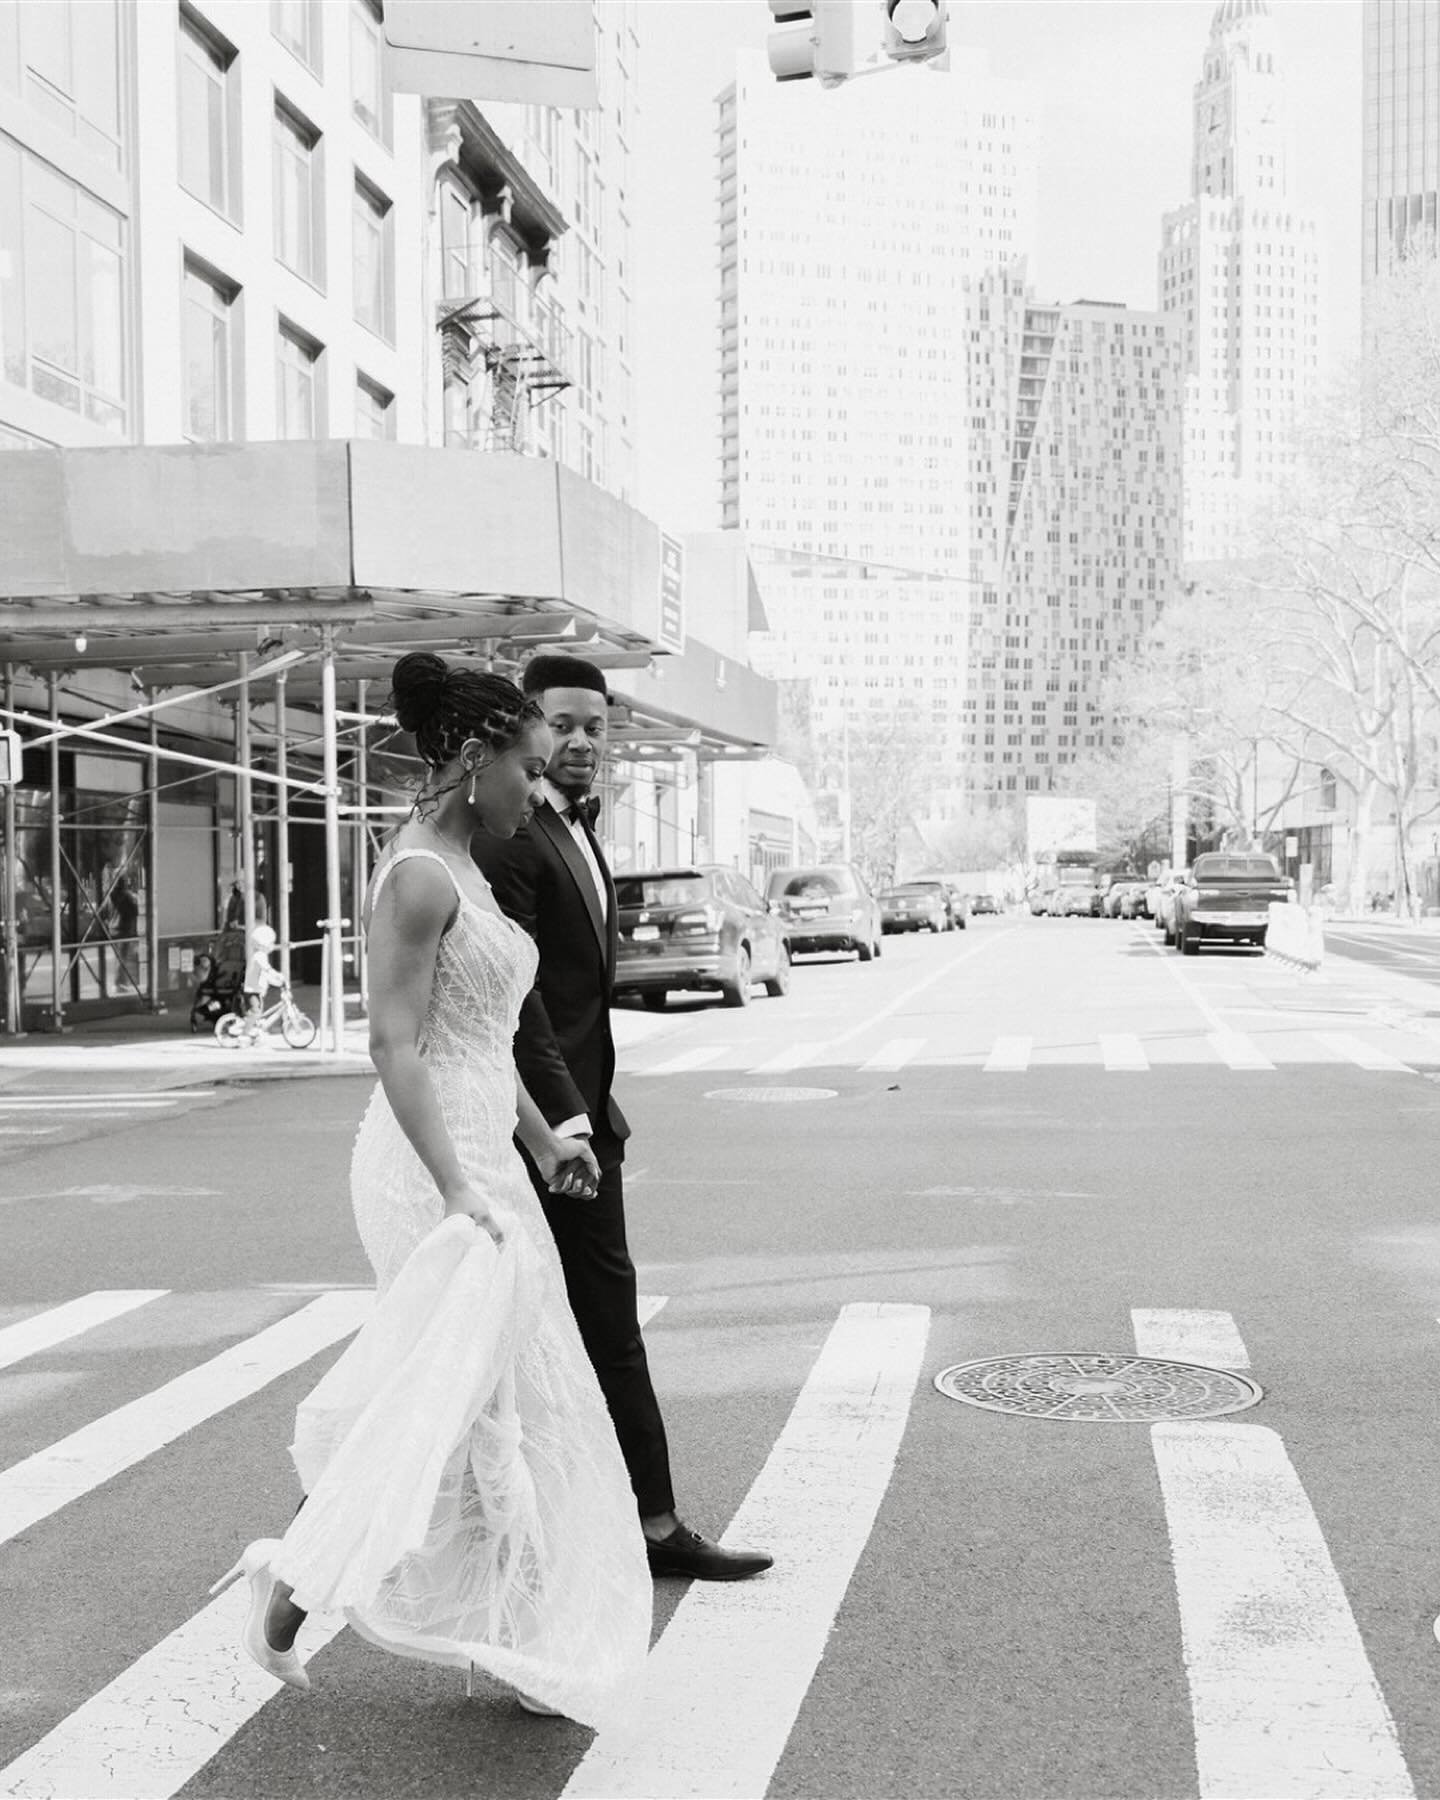 Sharing some more favorites from this amazing Brooklyn wedding!